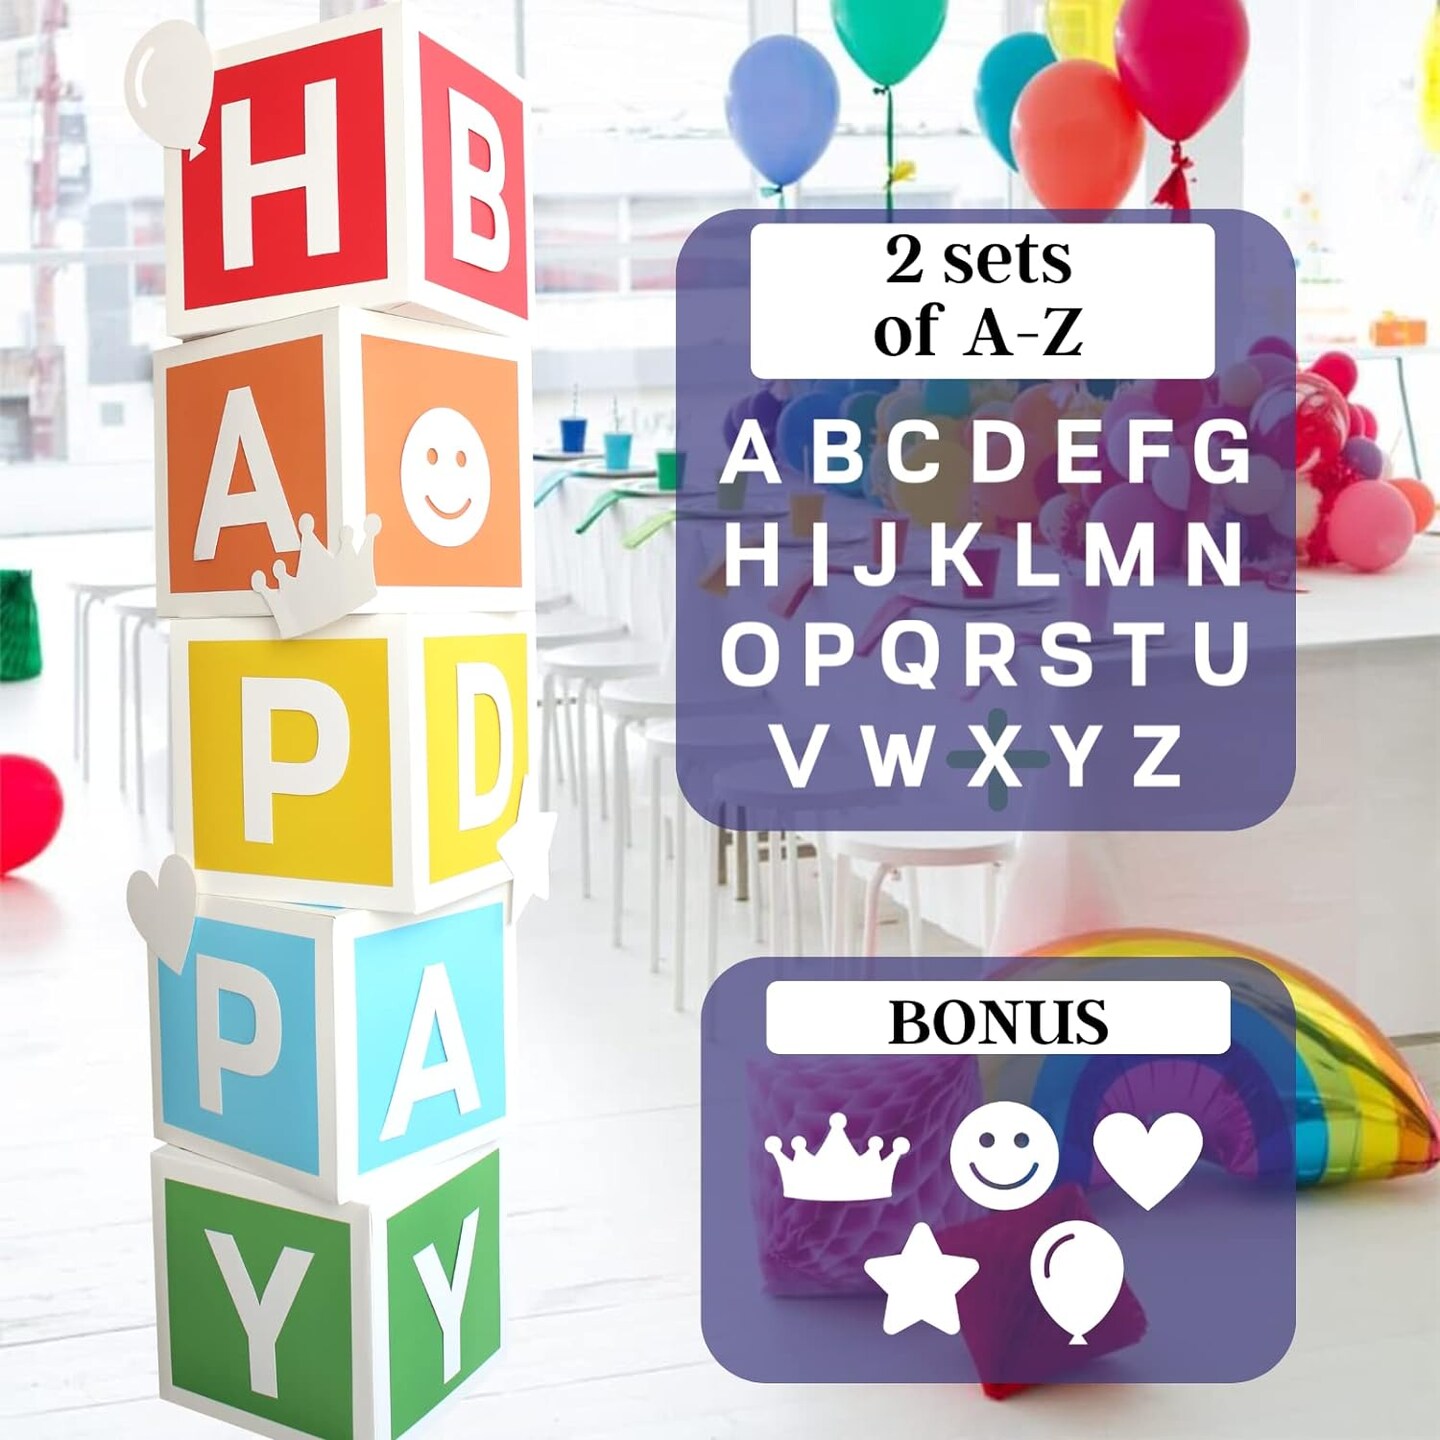 Rainbow Party Decorations - 5 PC Letter Boxes for Party - 52 PC Letters (2-Sets of A-Z) for Custom NAME, 5 PC Fun Cutouts - Colorful Birthday Decorations Rainbow Birthday Decorations Block Letters